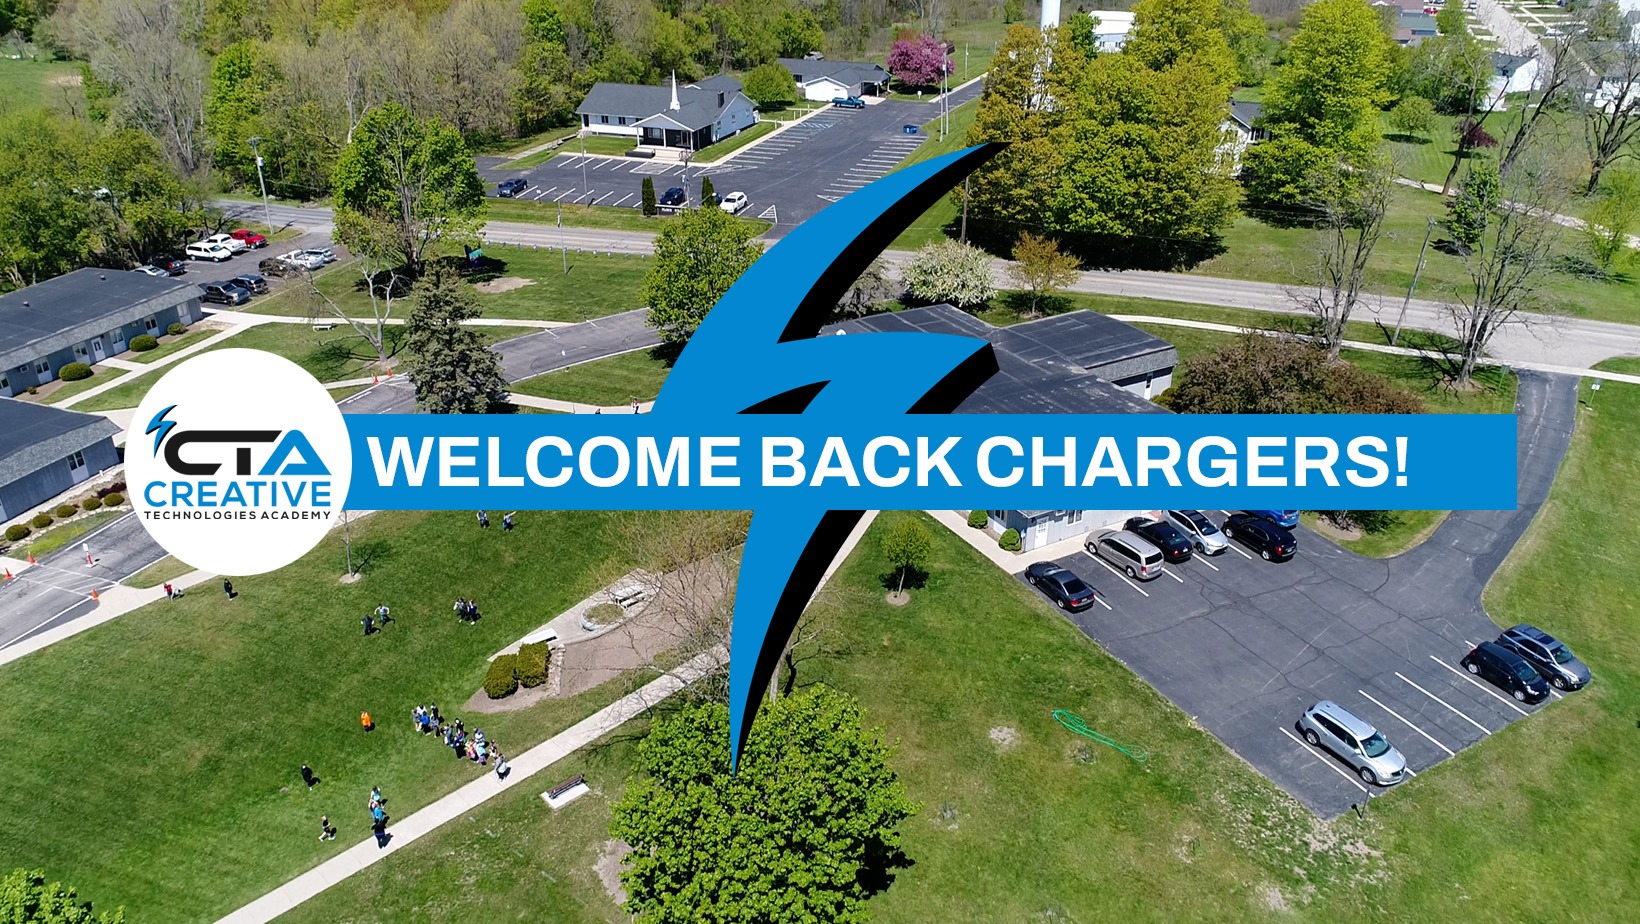 welcome back chargers!